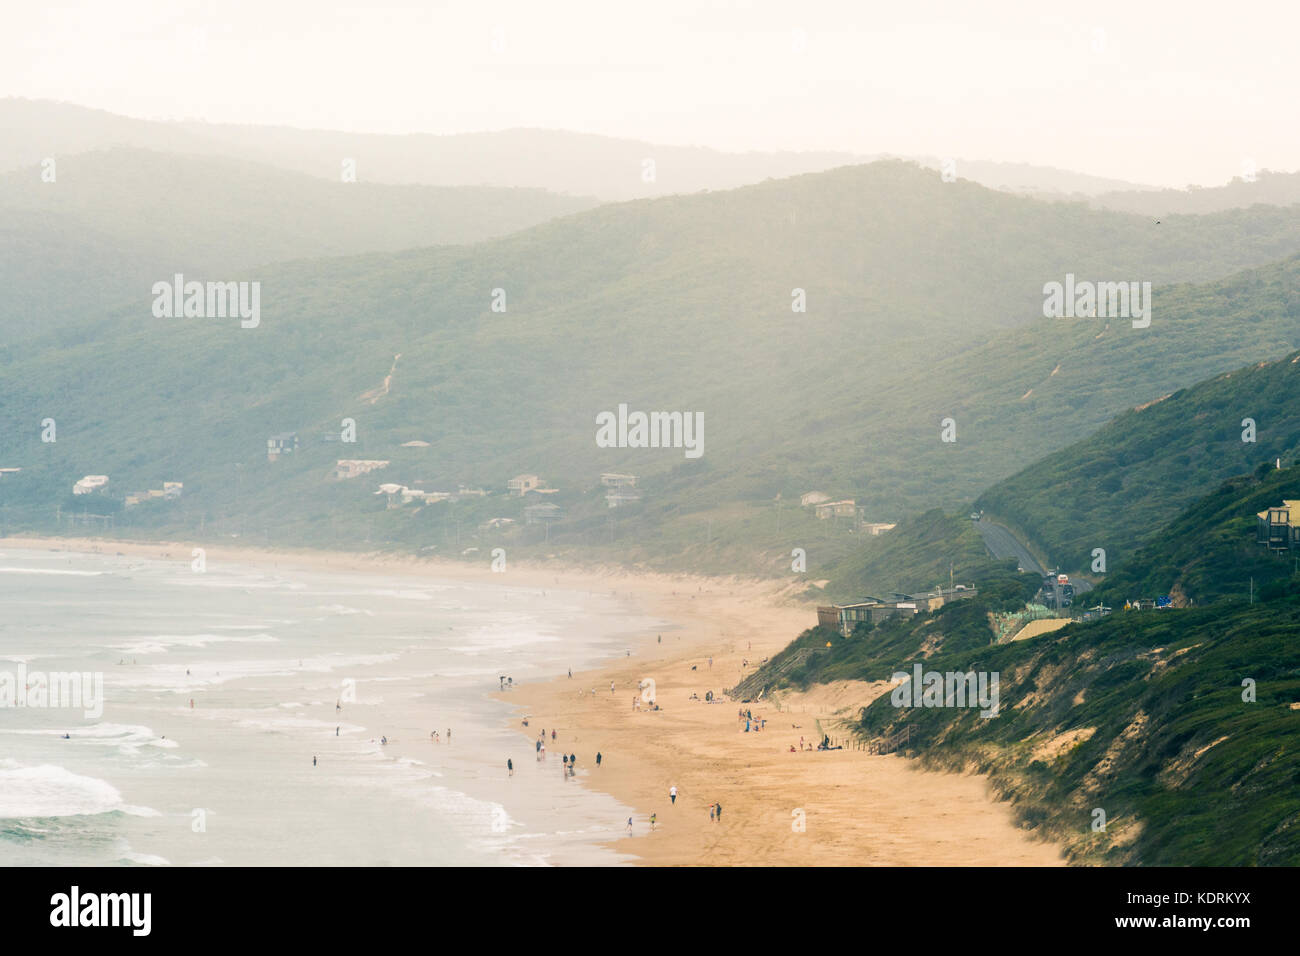 picturesque beach along the great ocean road in Australia. raised view of people walking along the beach with a glowing summer haze in the air Stock Photo